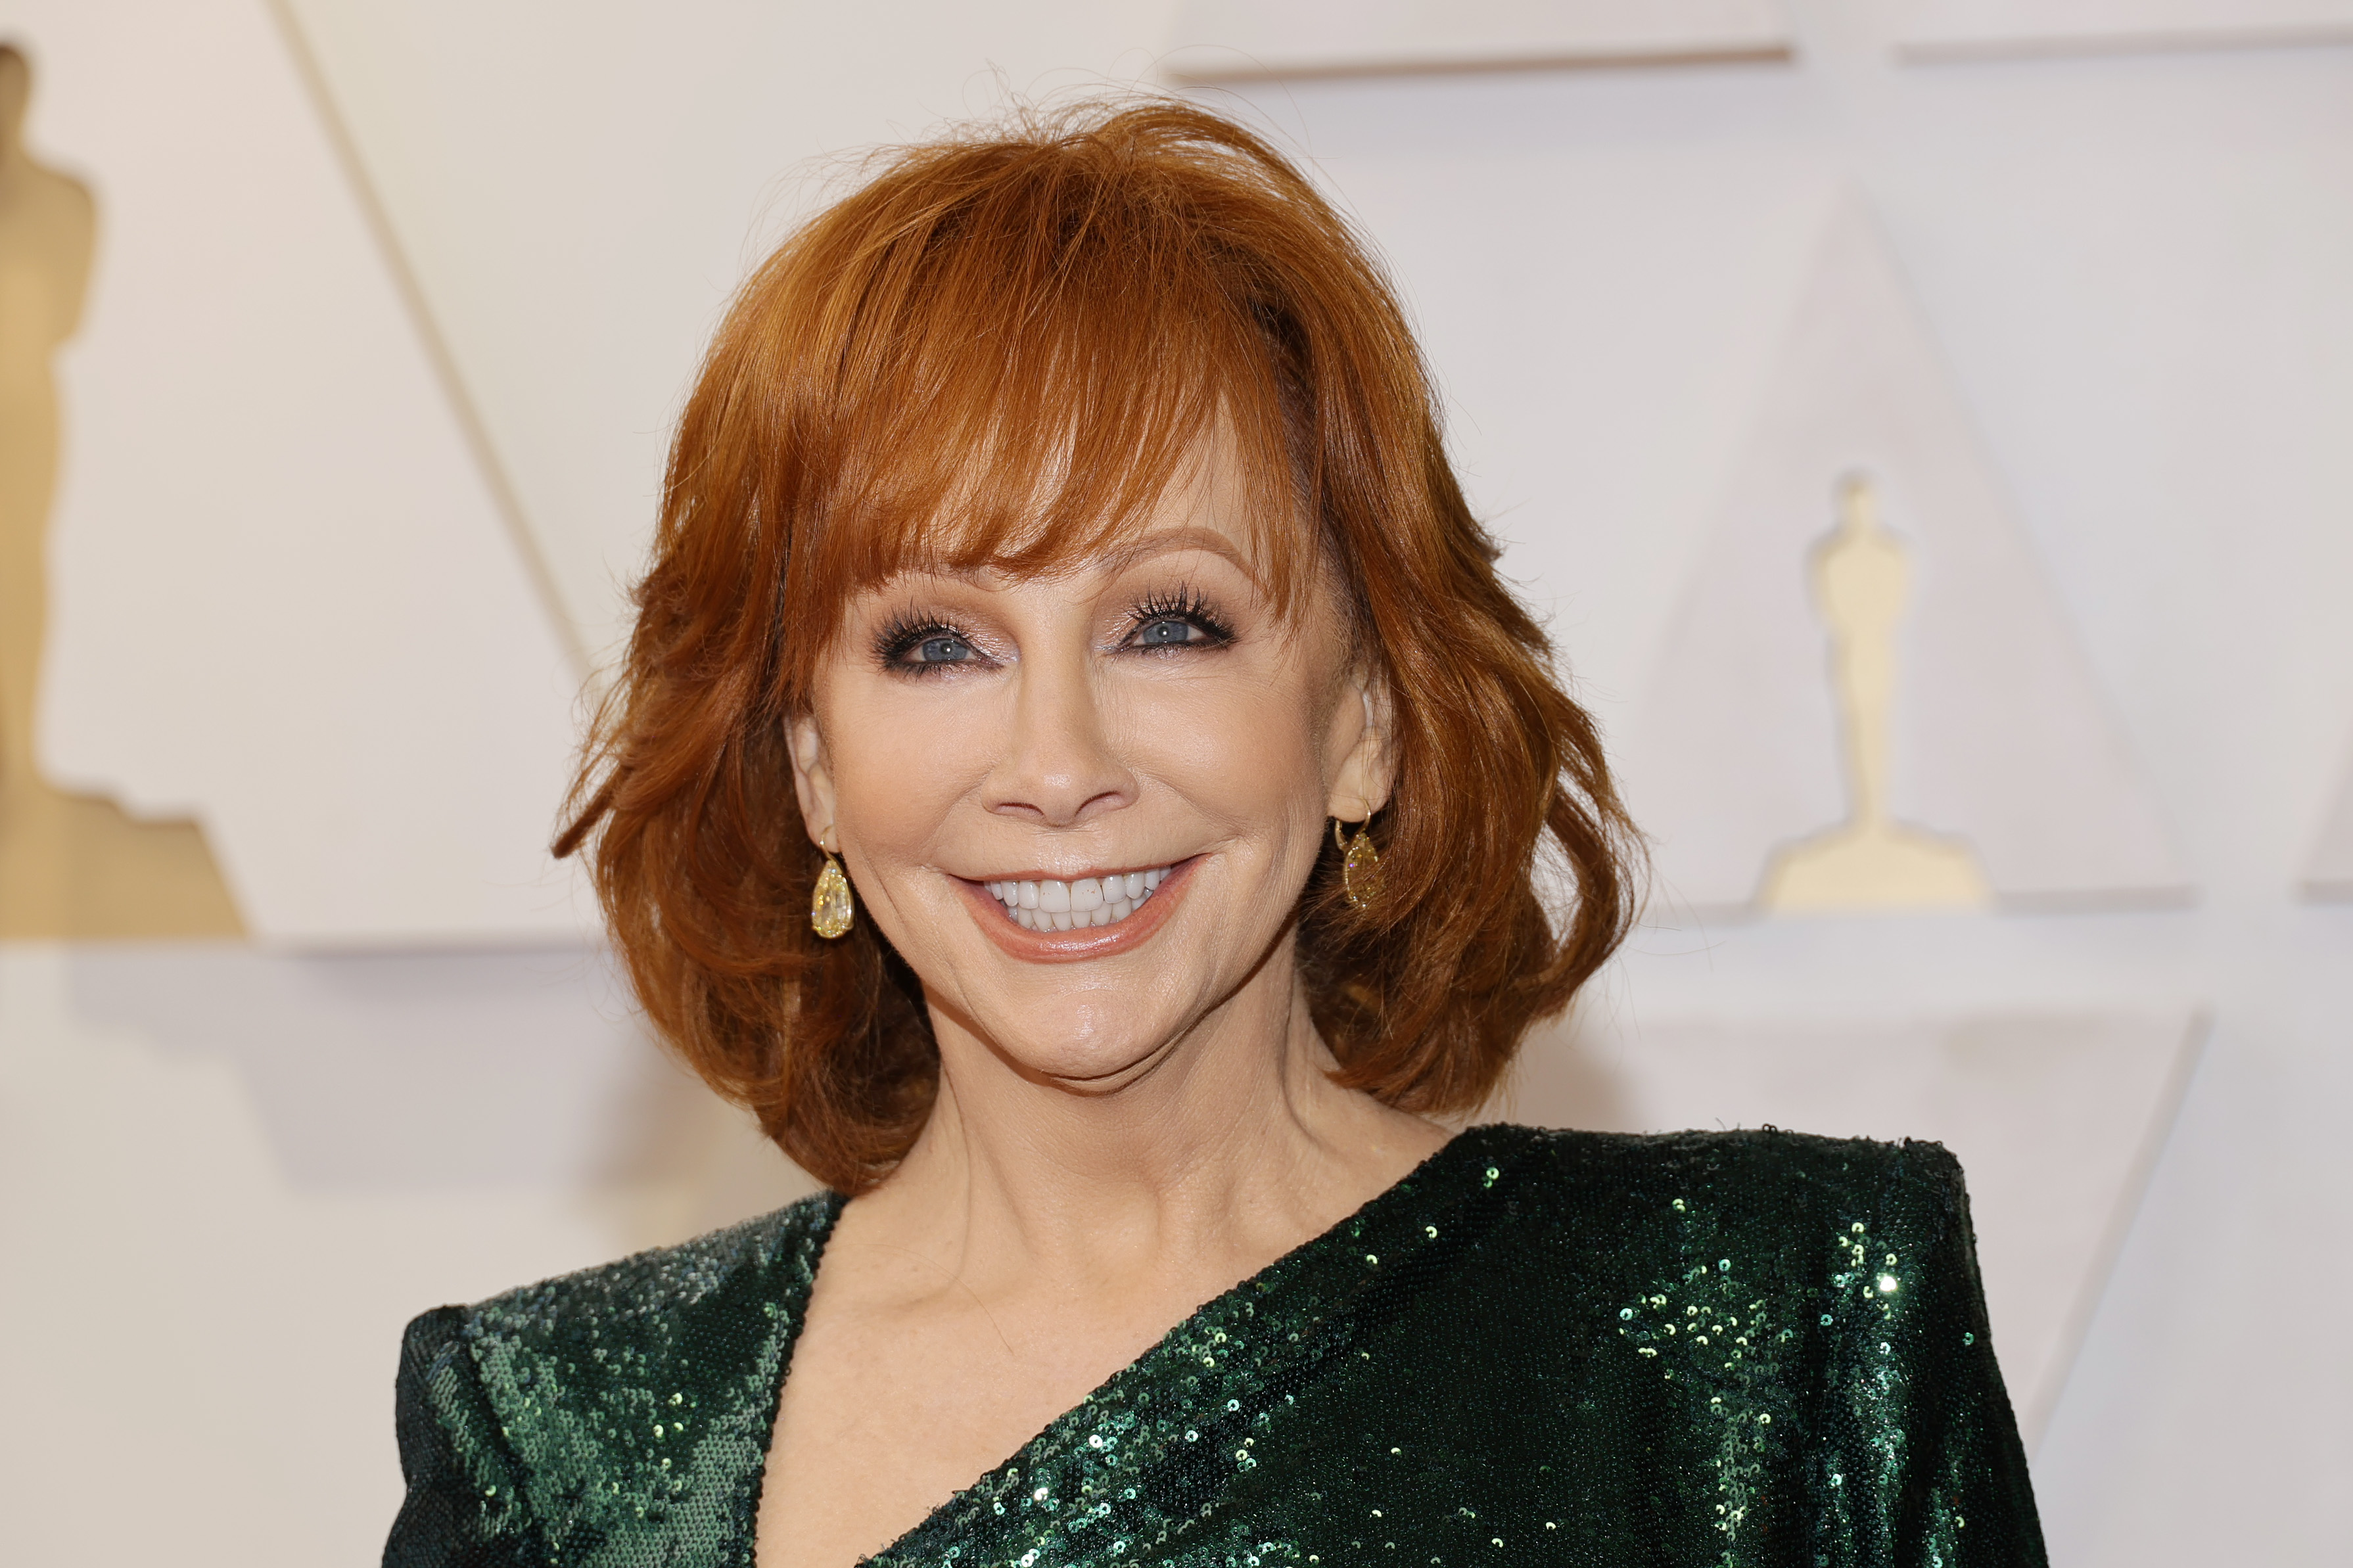 Reba McEntire attends the 94th Annual Academy Awards at Hollywood and Highland on March 27, 2022 in Hollywood, California. | Source: Getty Images